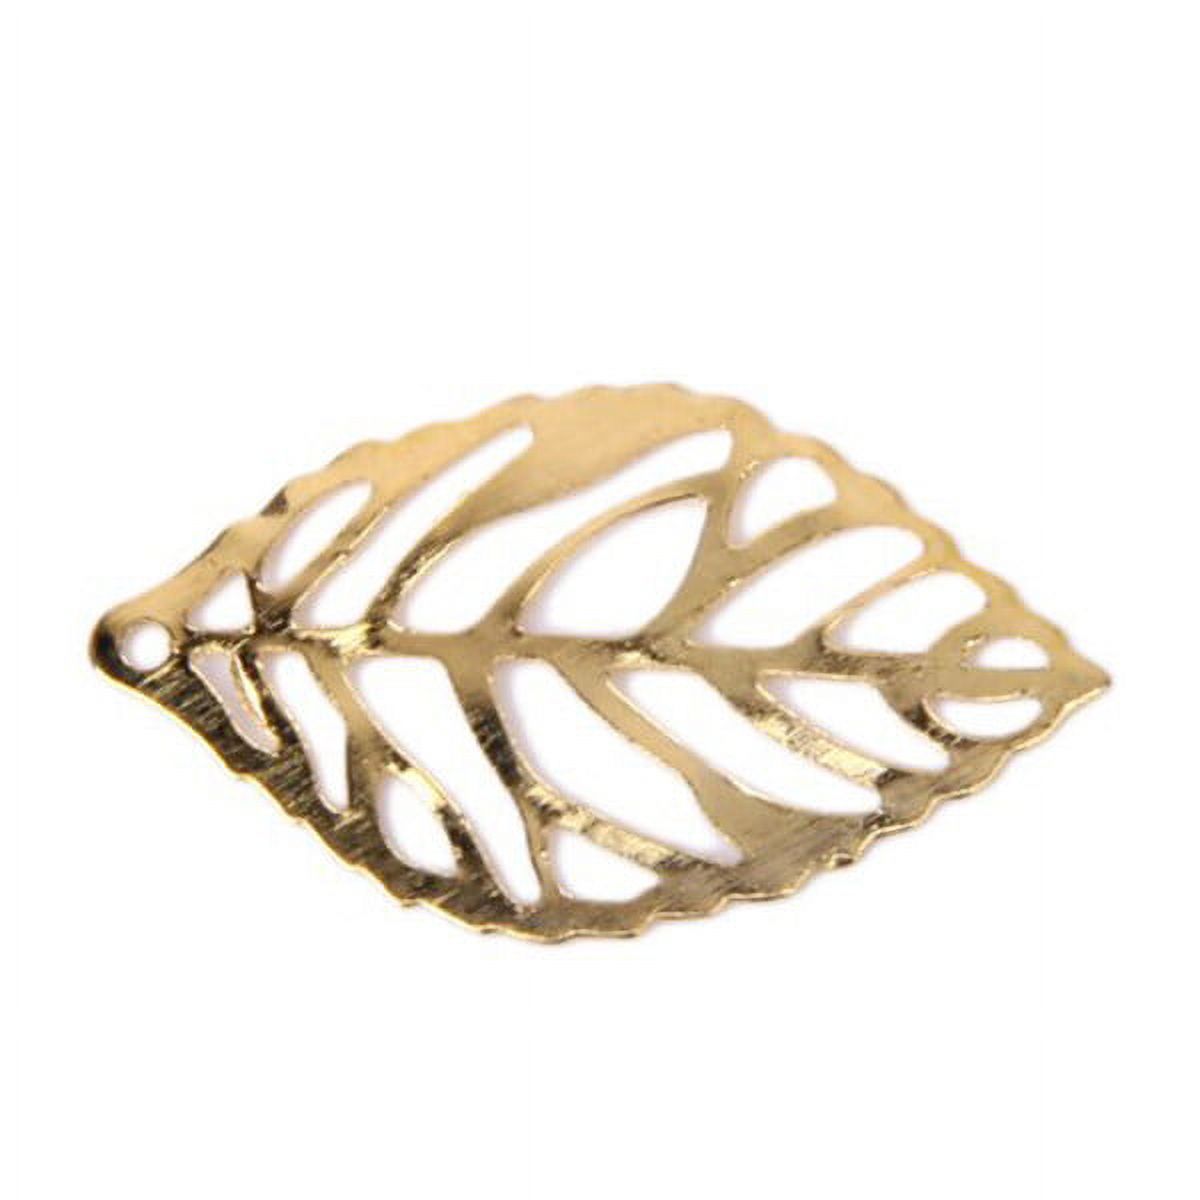 Leaf Tree Charms Jewelry Making Gold Leaves Metal Fall Crafts Embellishments Hollow Pierced Diy Alloy Decor Charm - image 2 of 5